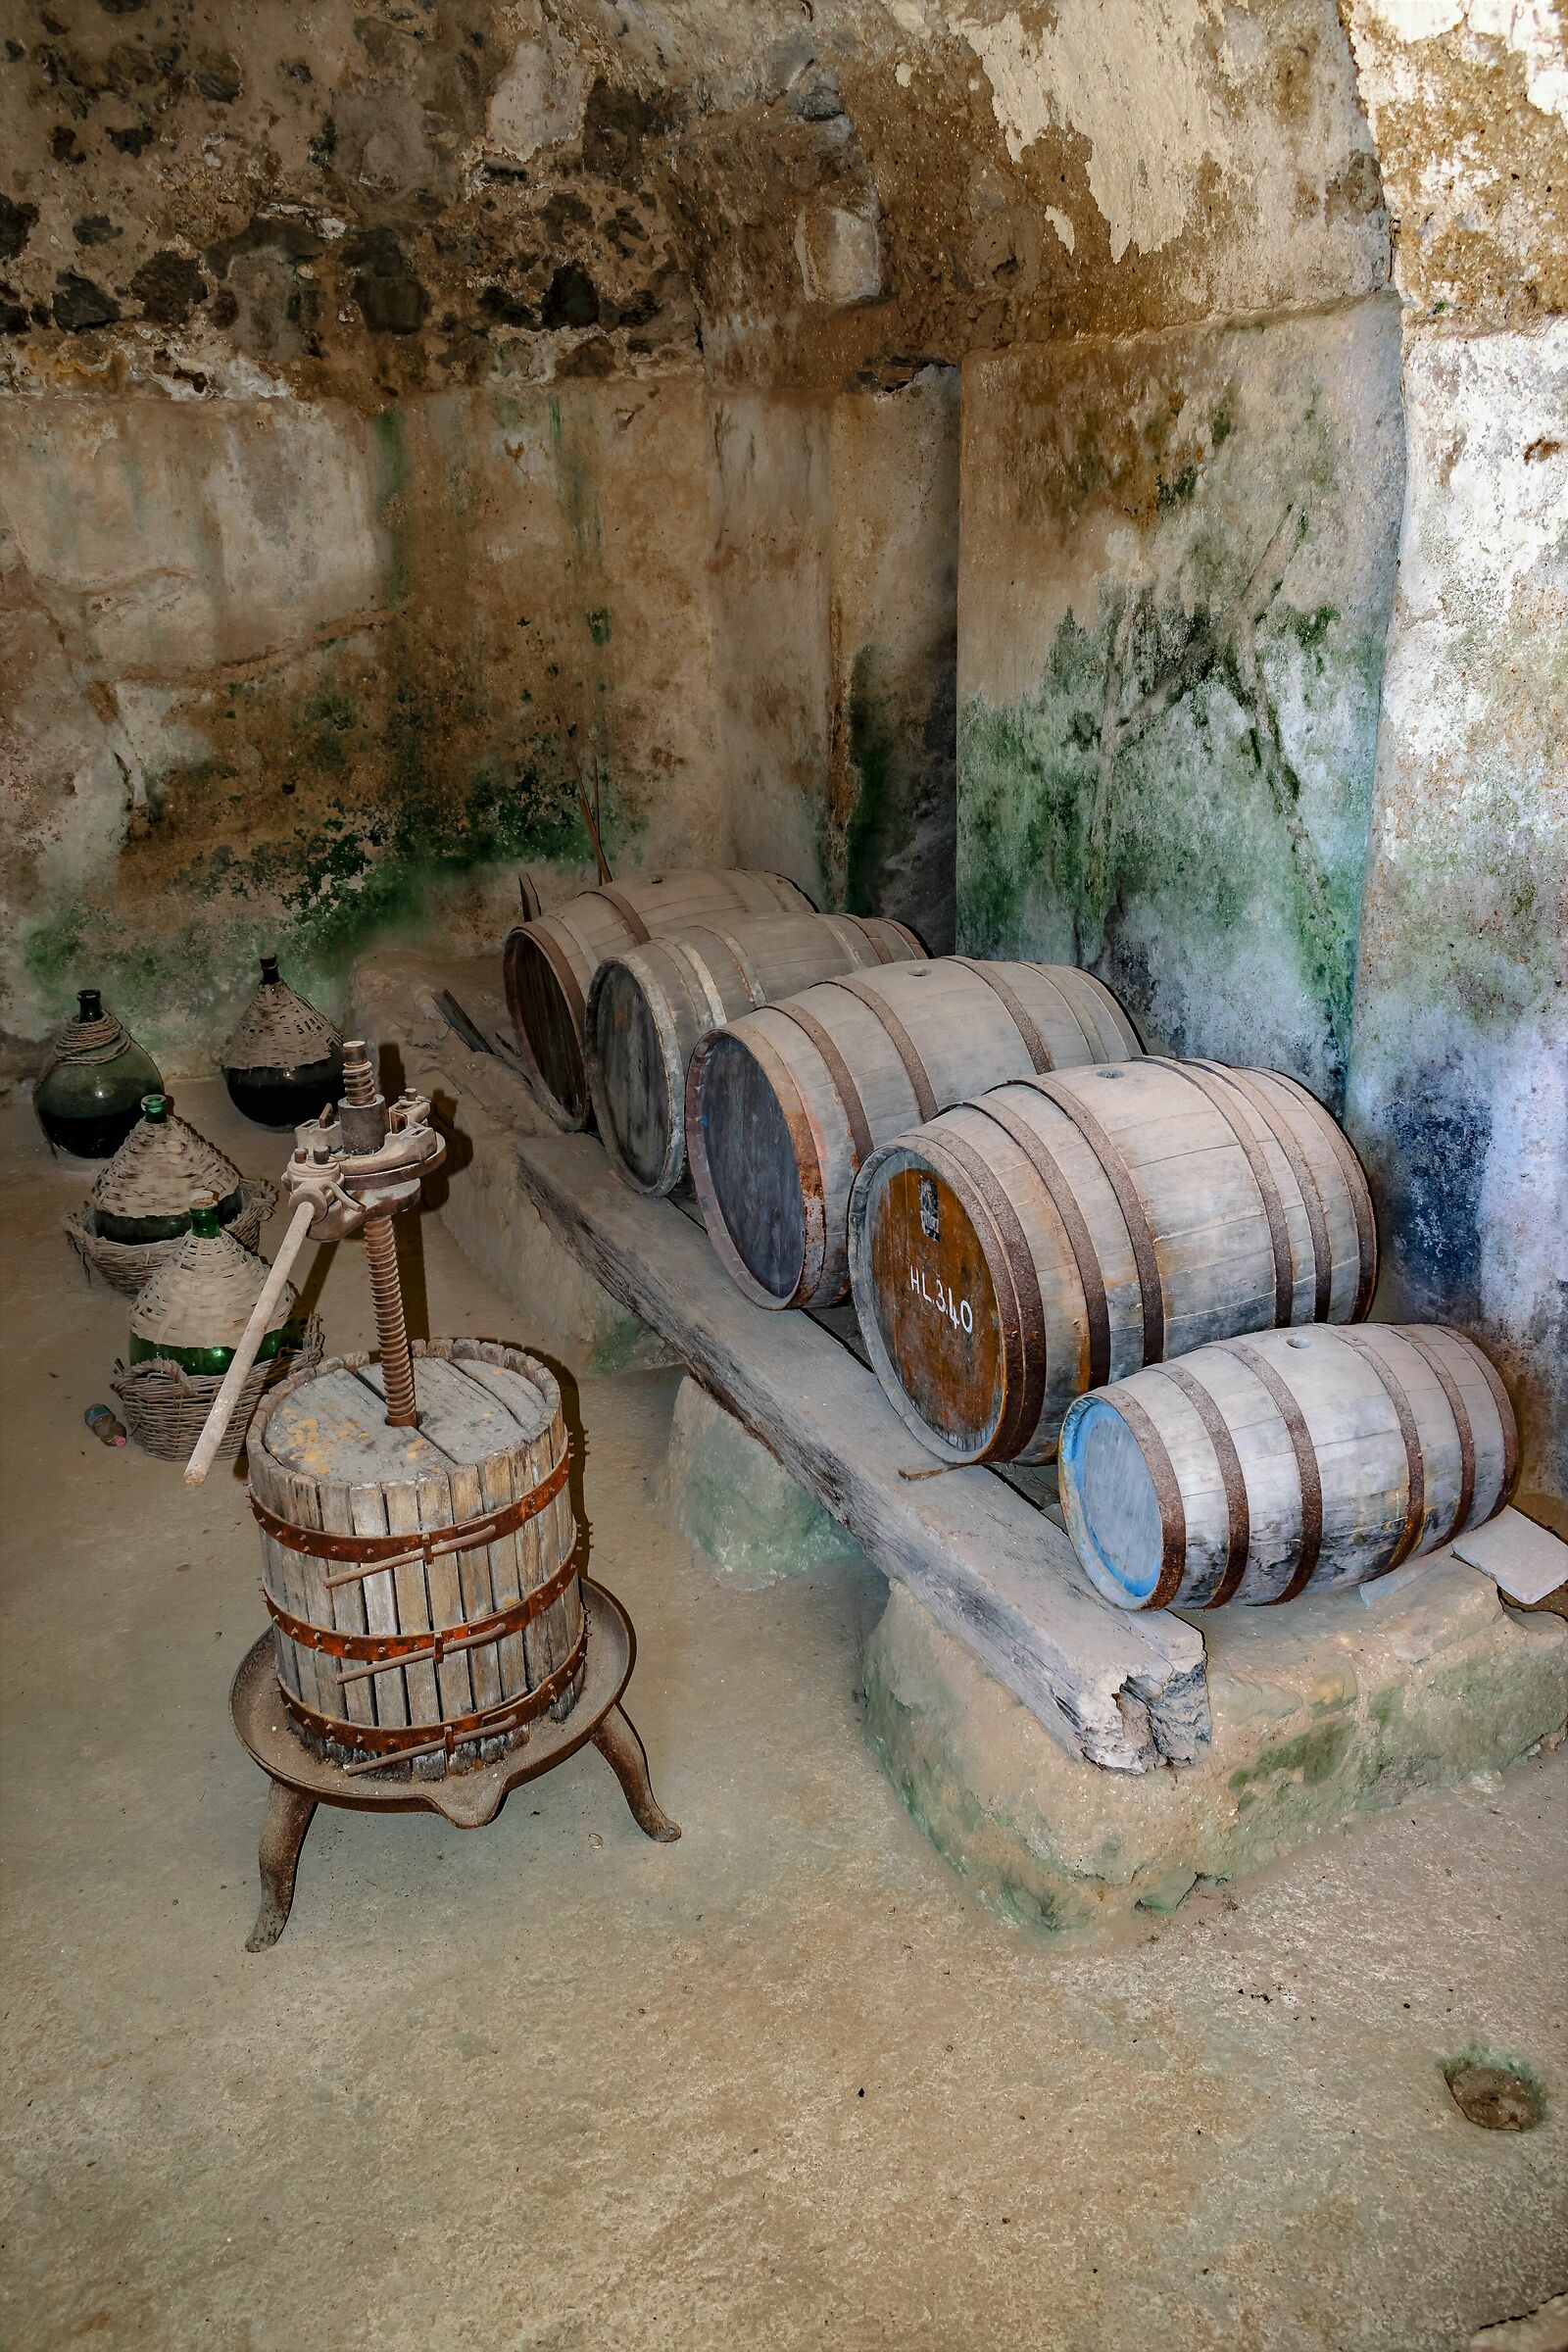 The cellar of the castle...